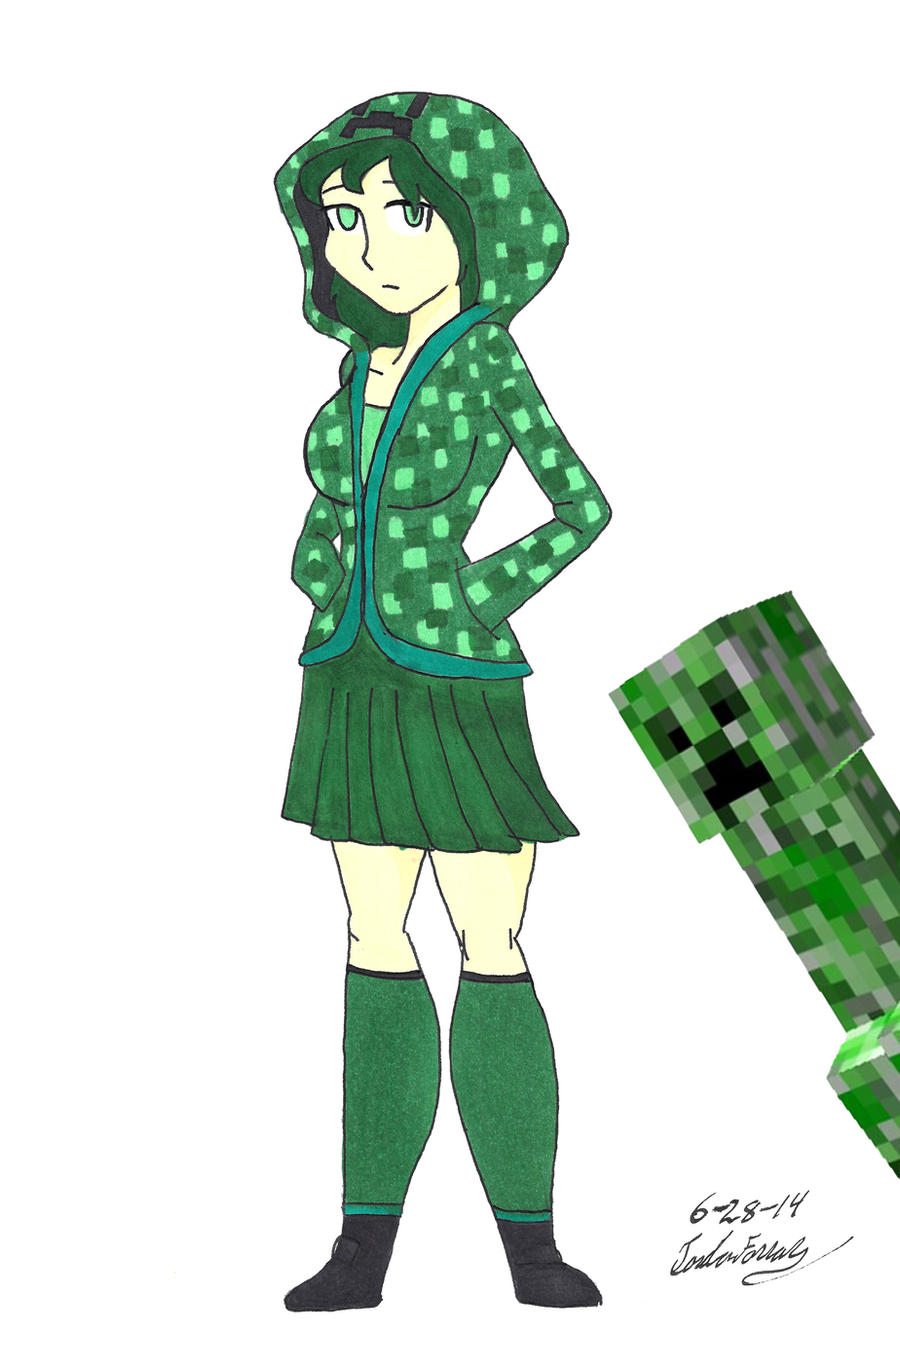 My Version Minecraft Mob Talker Creeper By Clinclang On Deviantart 